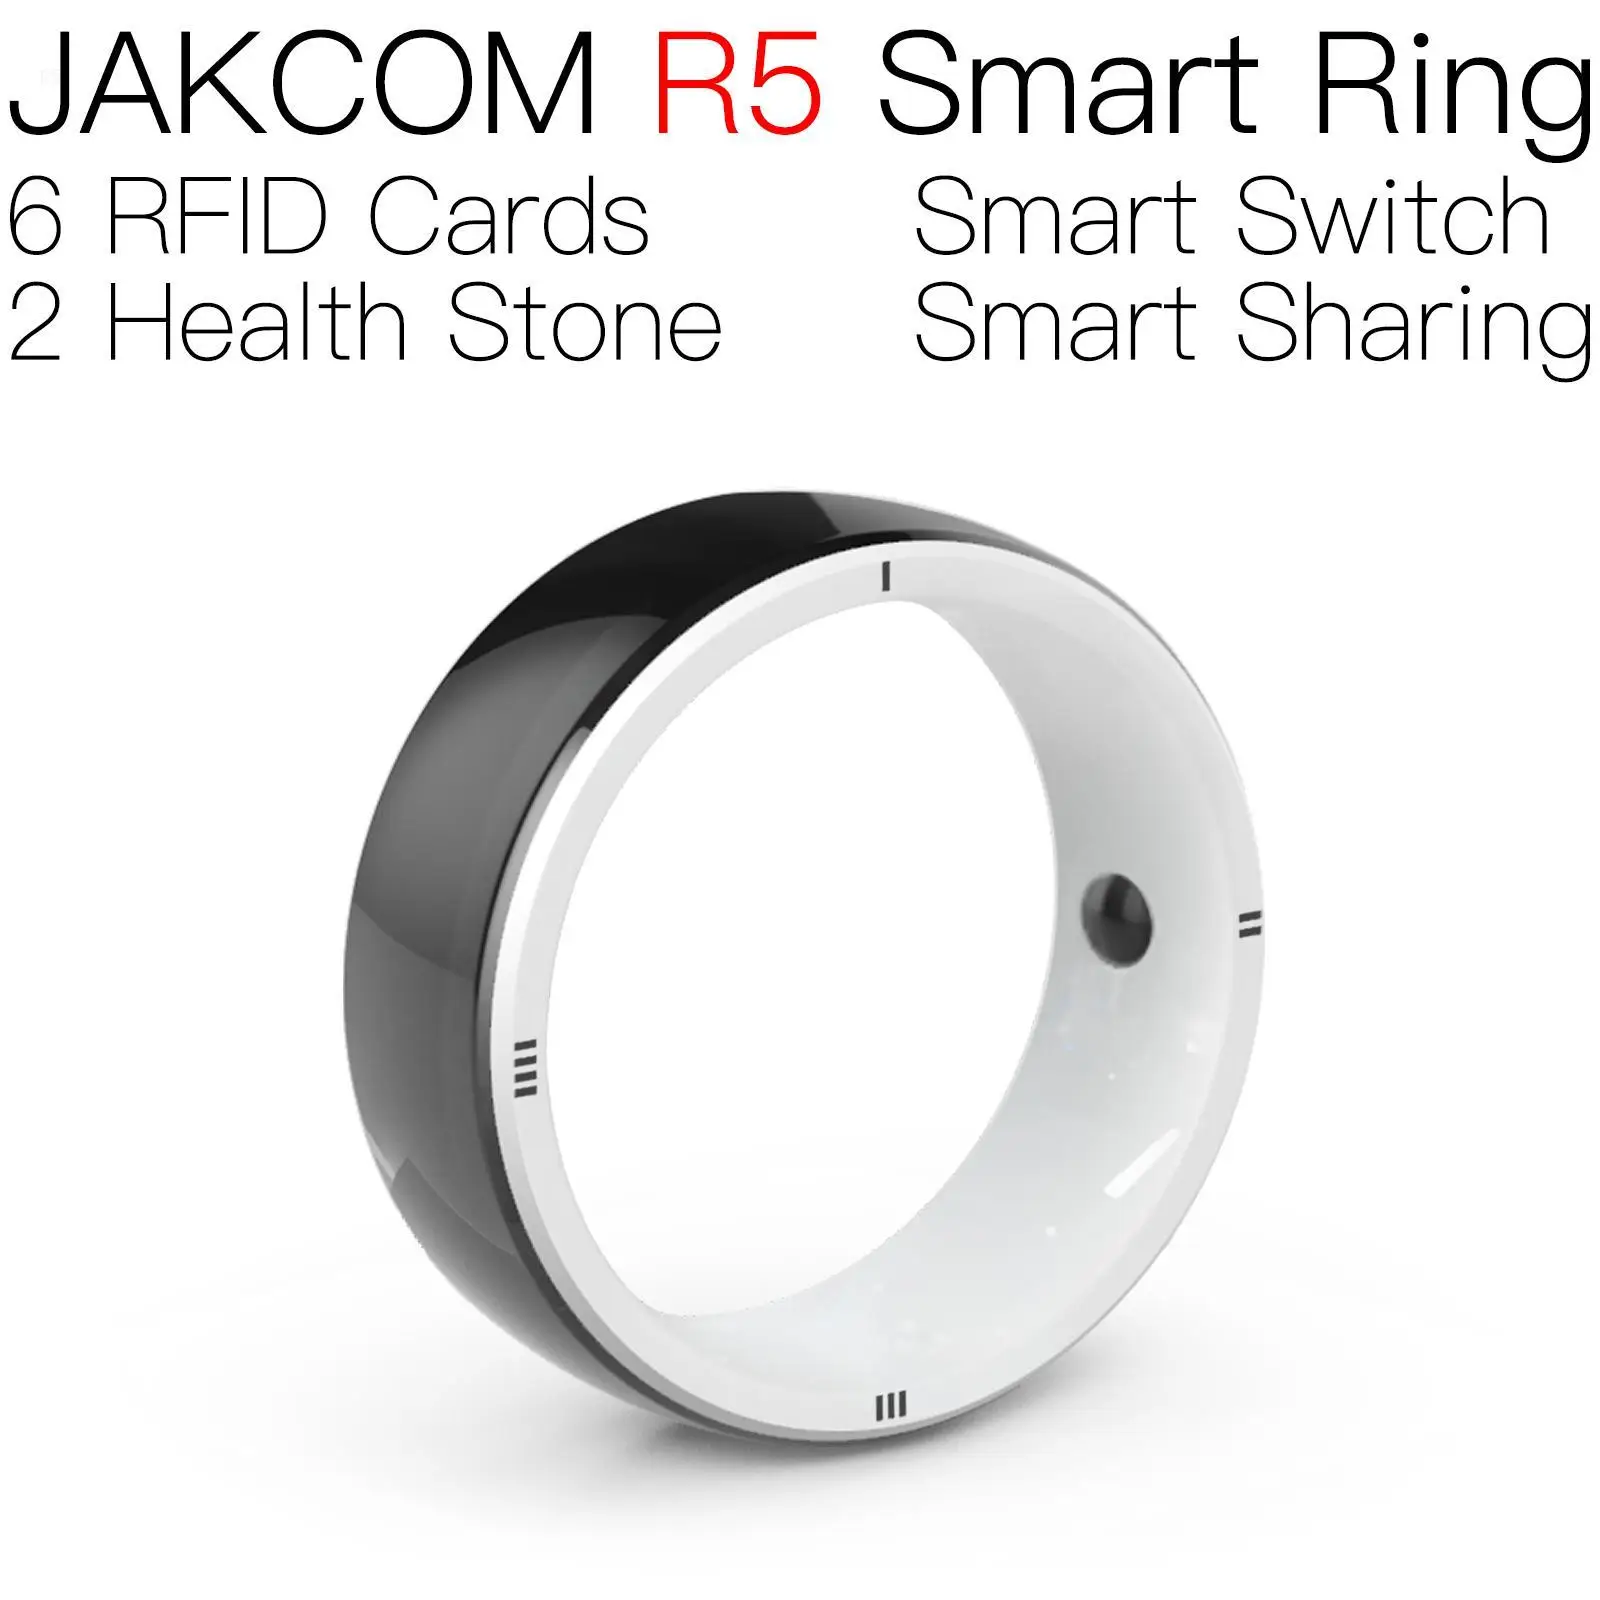 

JAKCOM R5 Smart Ring Nice than display 125khz rfid coin basesus smart tag programmable nfc sticker memory uhf 860 h502s